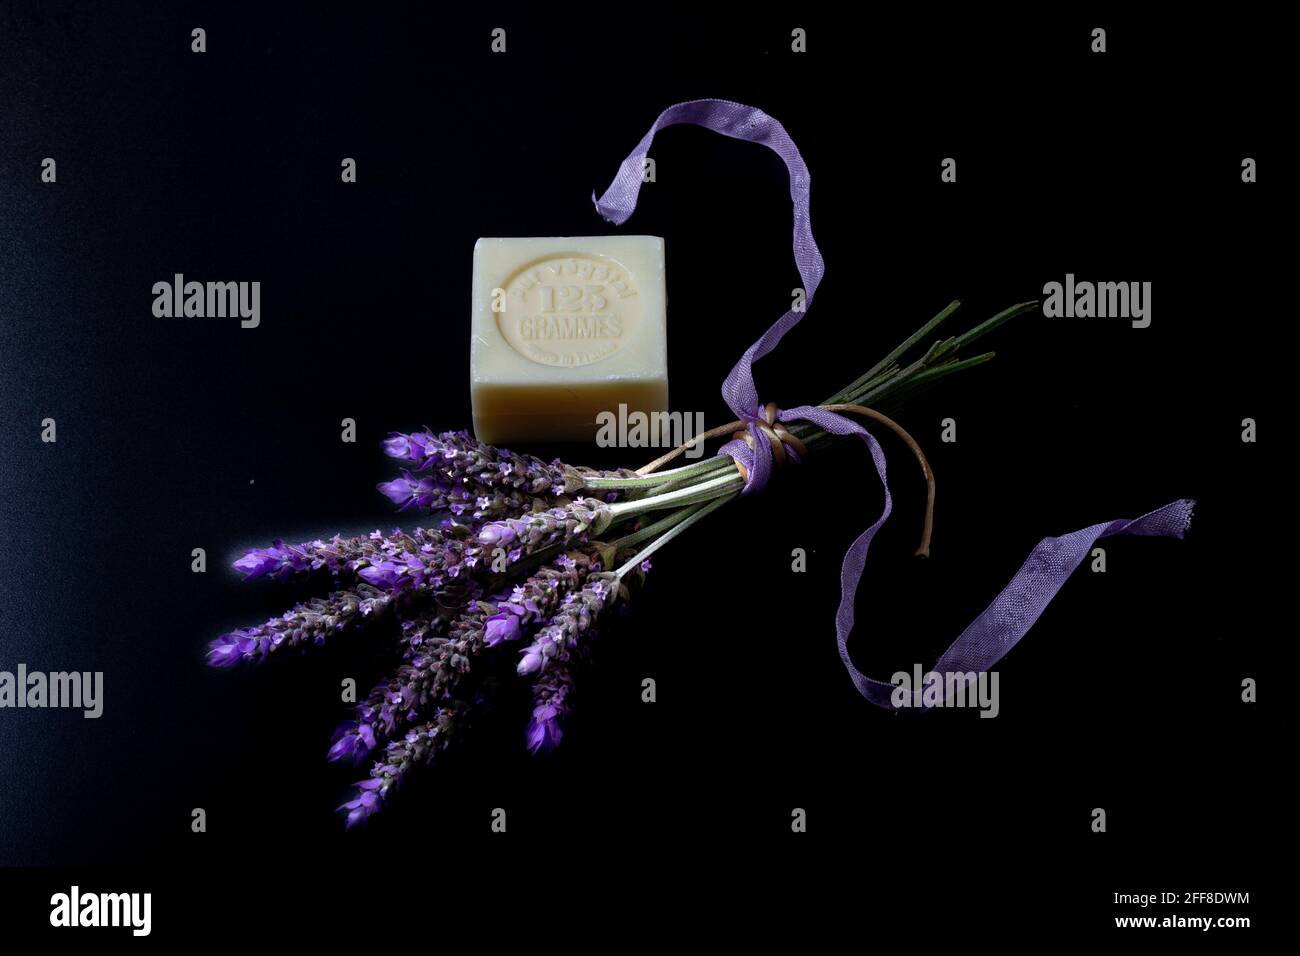 Bar of soap that has written in French 'Pure vegetable, 125 grams, made in France' with a bouquet of lavender flowers tied with cream-colored rope and Stock Photo